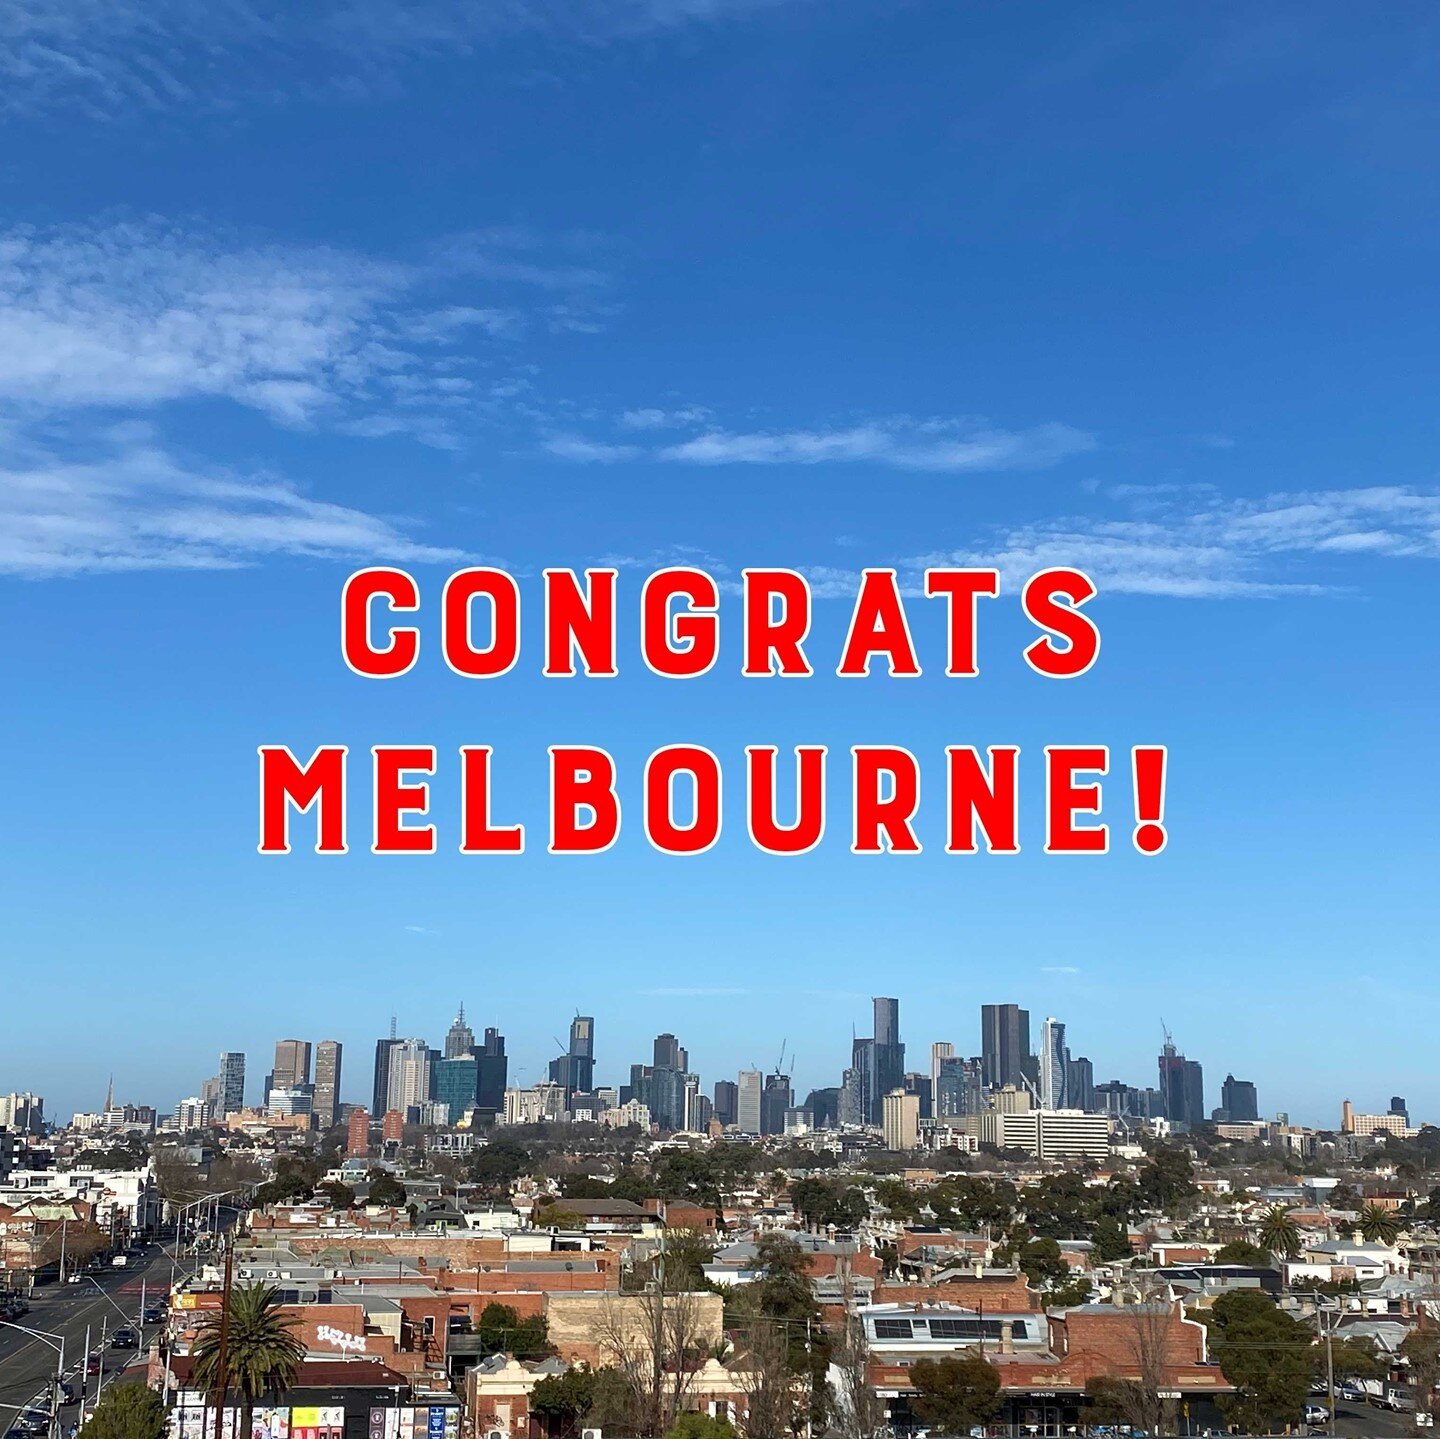 Well done Melbourne - Rolling up sleeves and getting vaxxed like no tomorrow!⁠
⁠
Opening a week earlier than anticipated will have its share of challenges but it's so exciting to see things moving into a new phase.⁠
⁠
La Carta is also getting back in